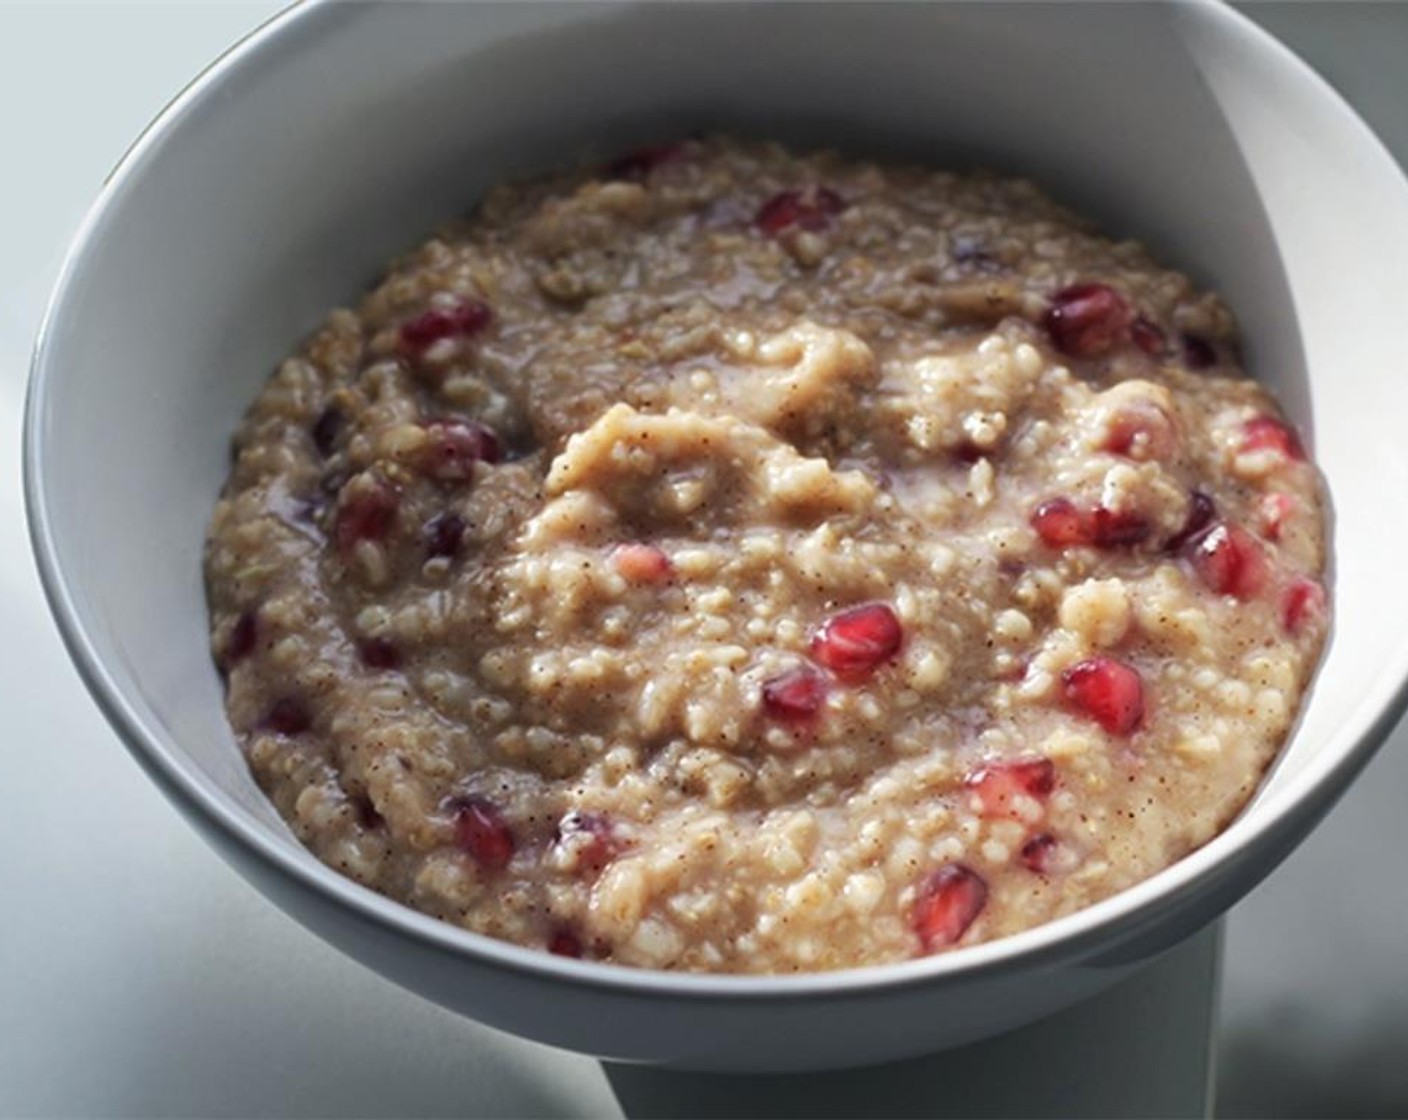 step 4 When the oats and water have started to bind, add the Ground Cinnamon (1 tsp) and Vanilla Bean Paste (1 Tbsp). When it's almost fully cooked then add the Pomegranate Seeds (1/3 cup).